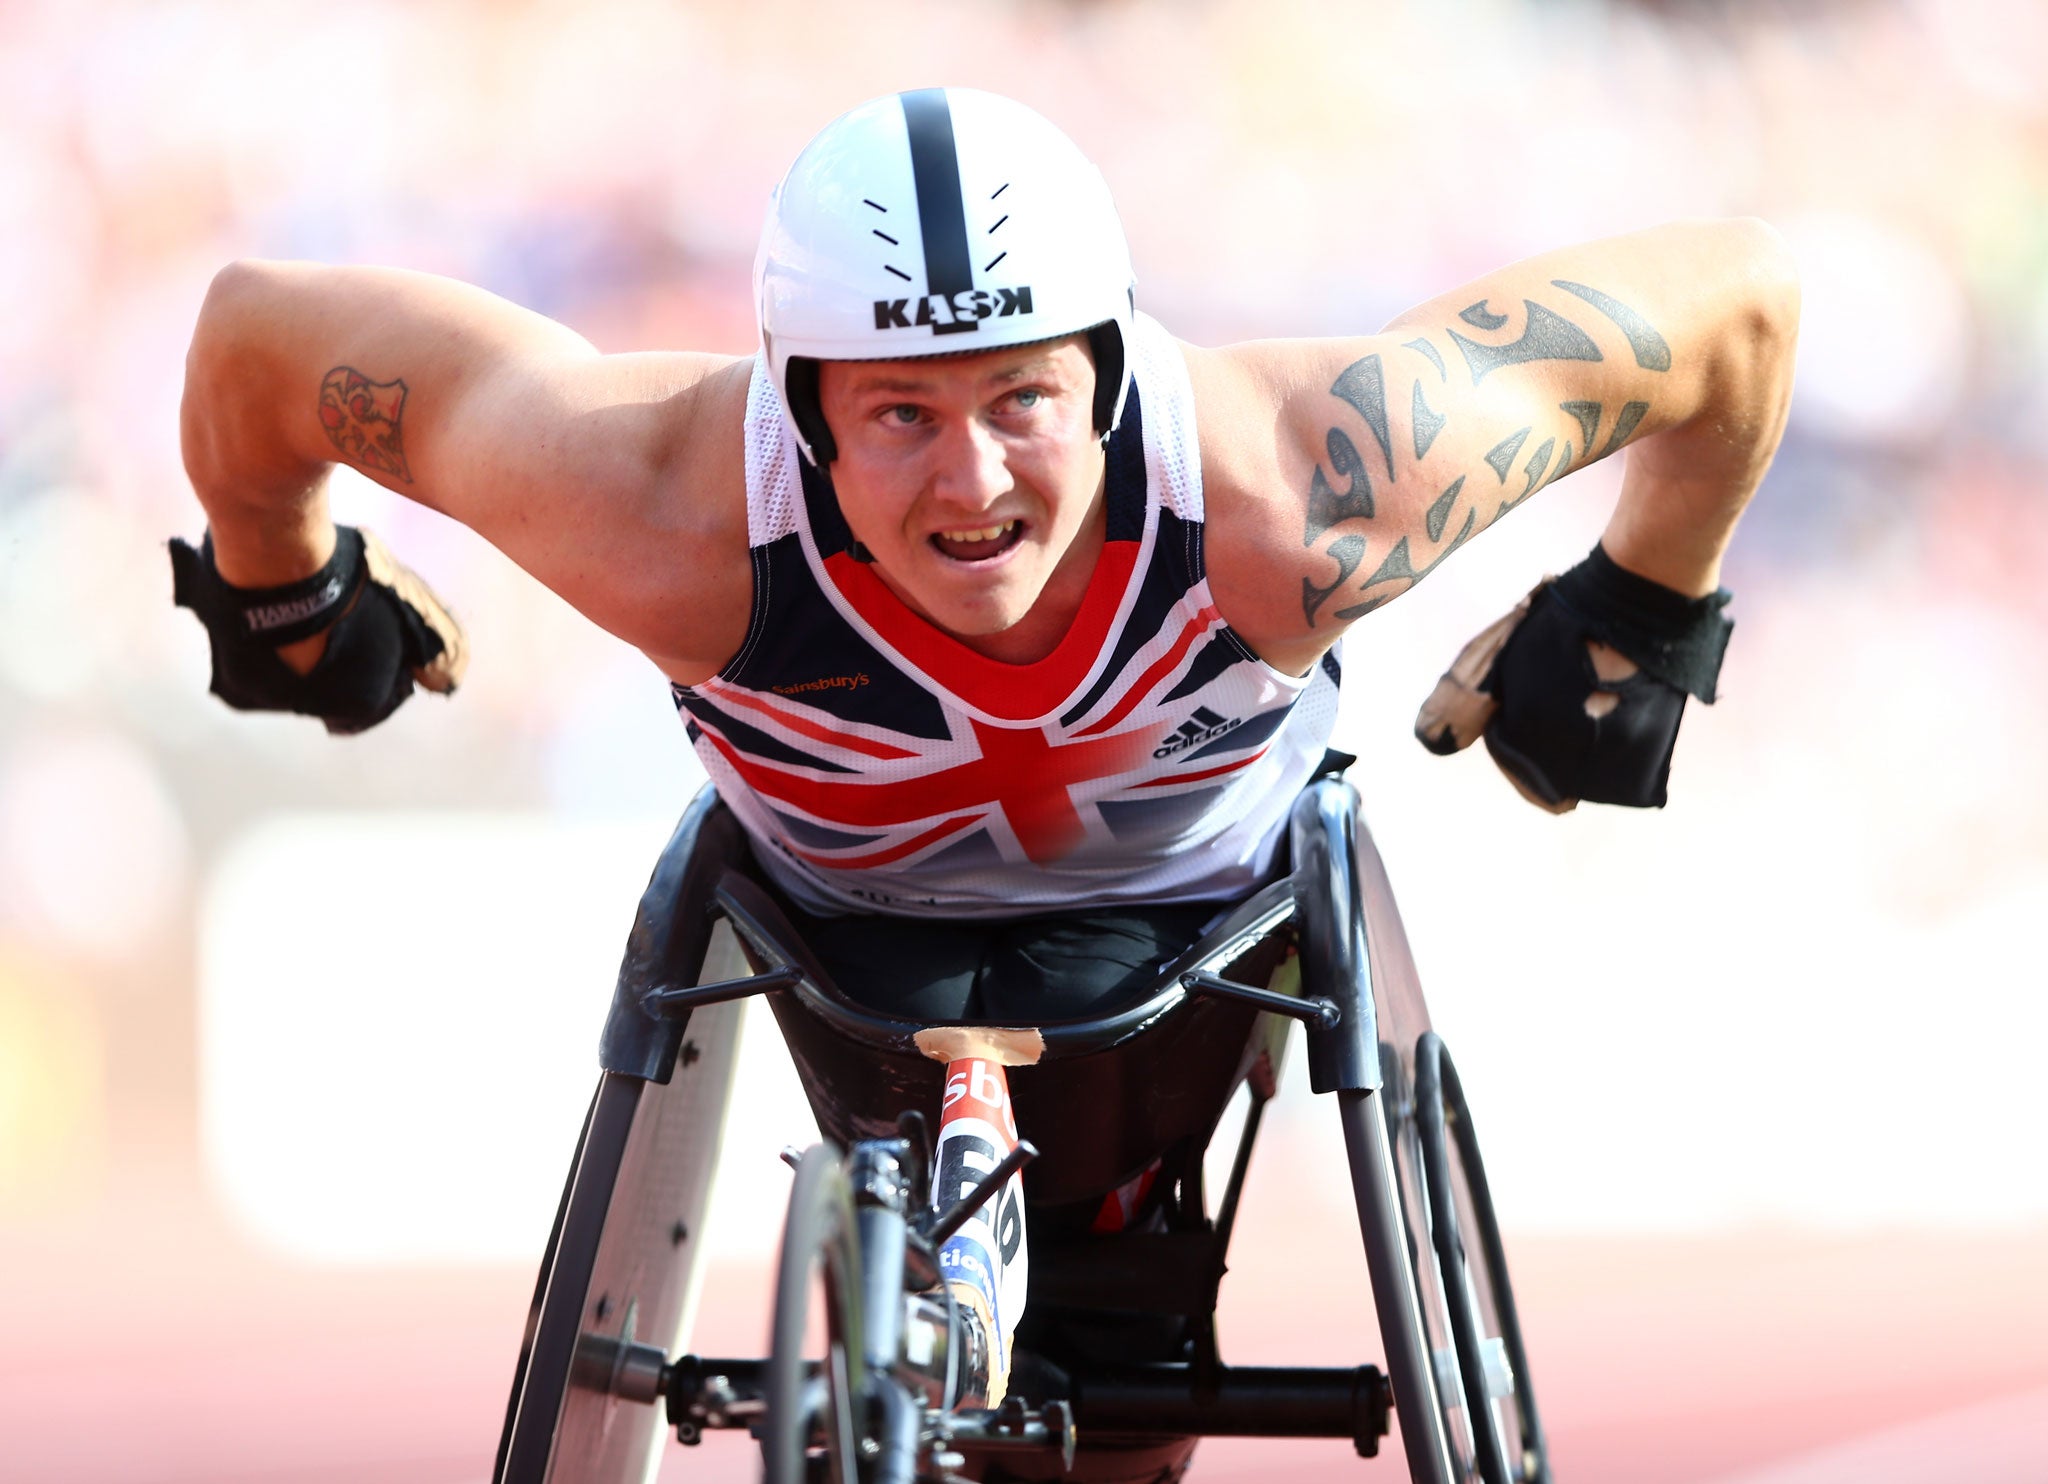 David Weir competes in the London 2012 Paralympic games